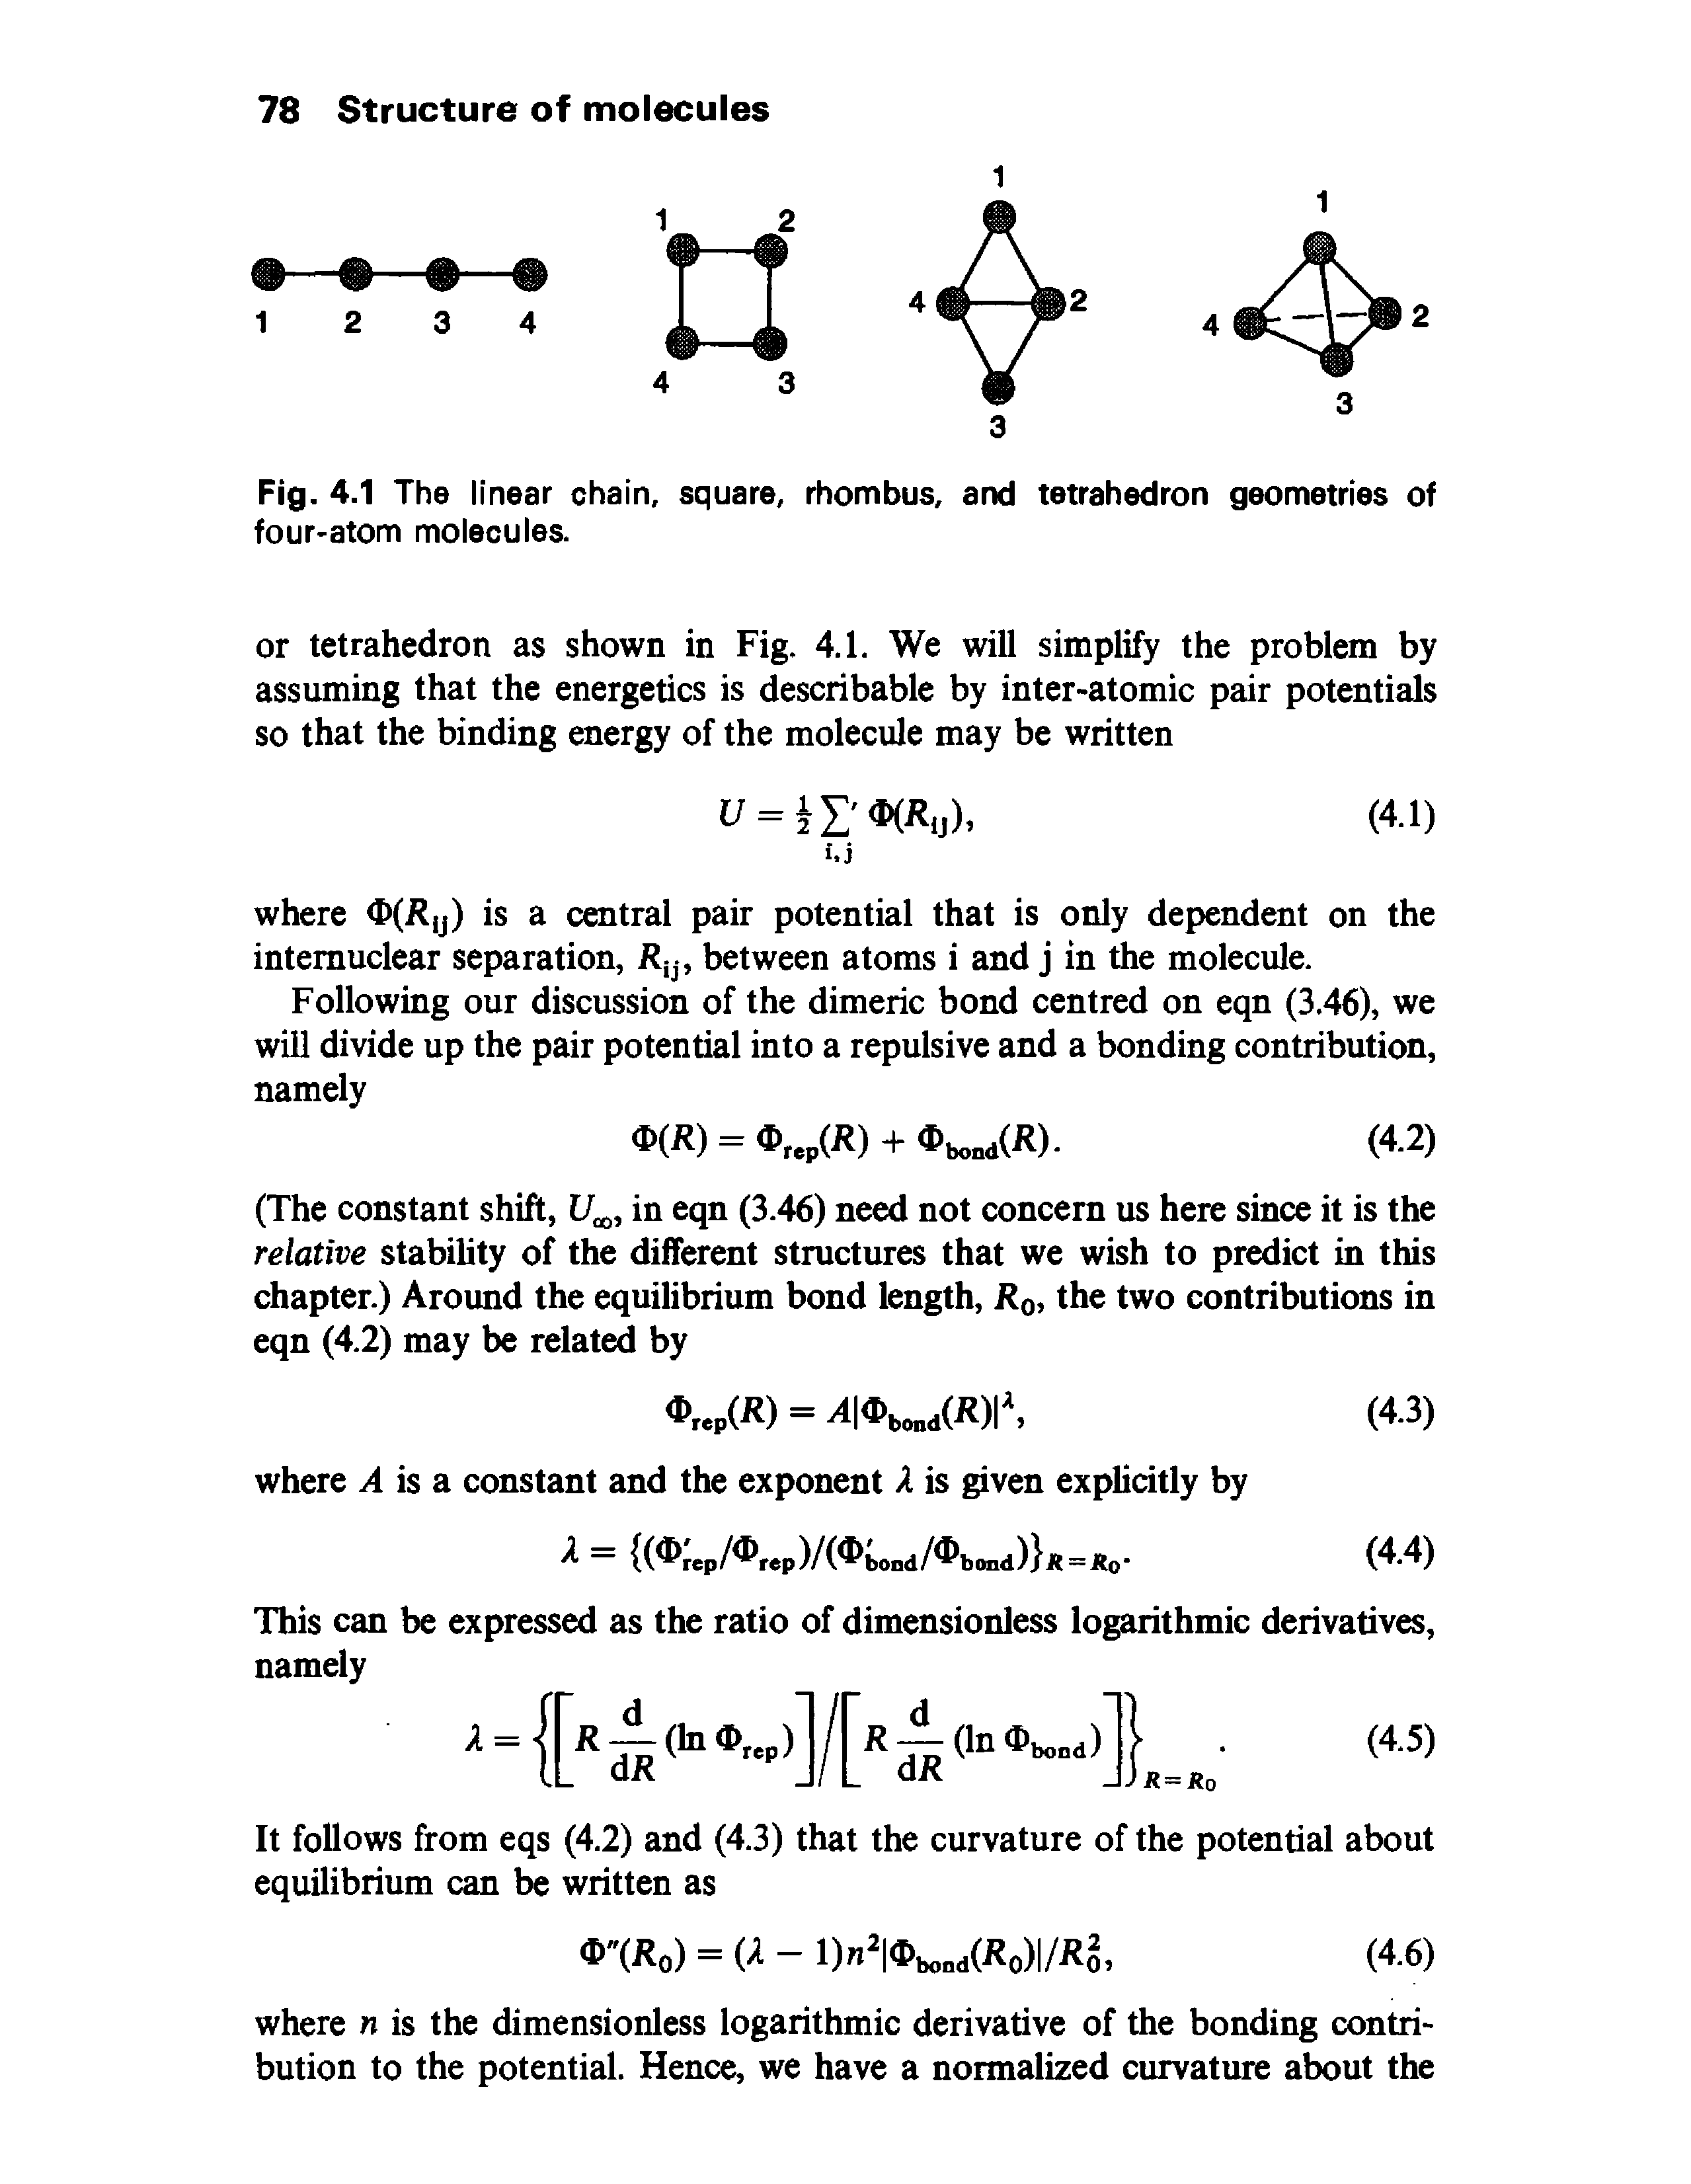 Fig. 4.1 The linear chain, square, rhombus, and tetrahedron geometries of four-atom molecules.